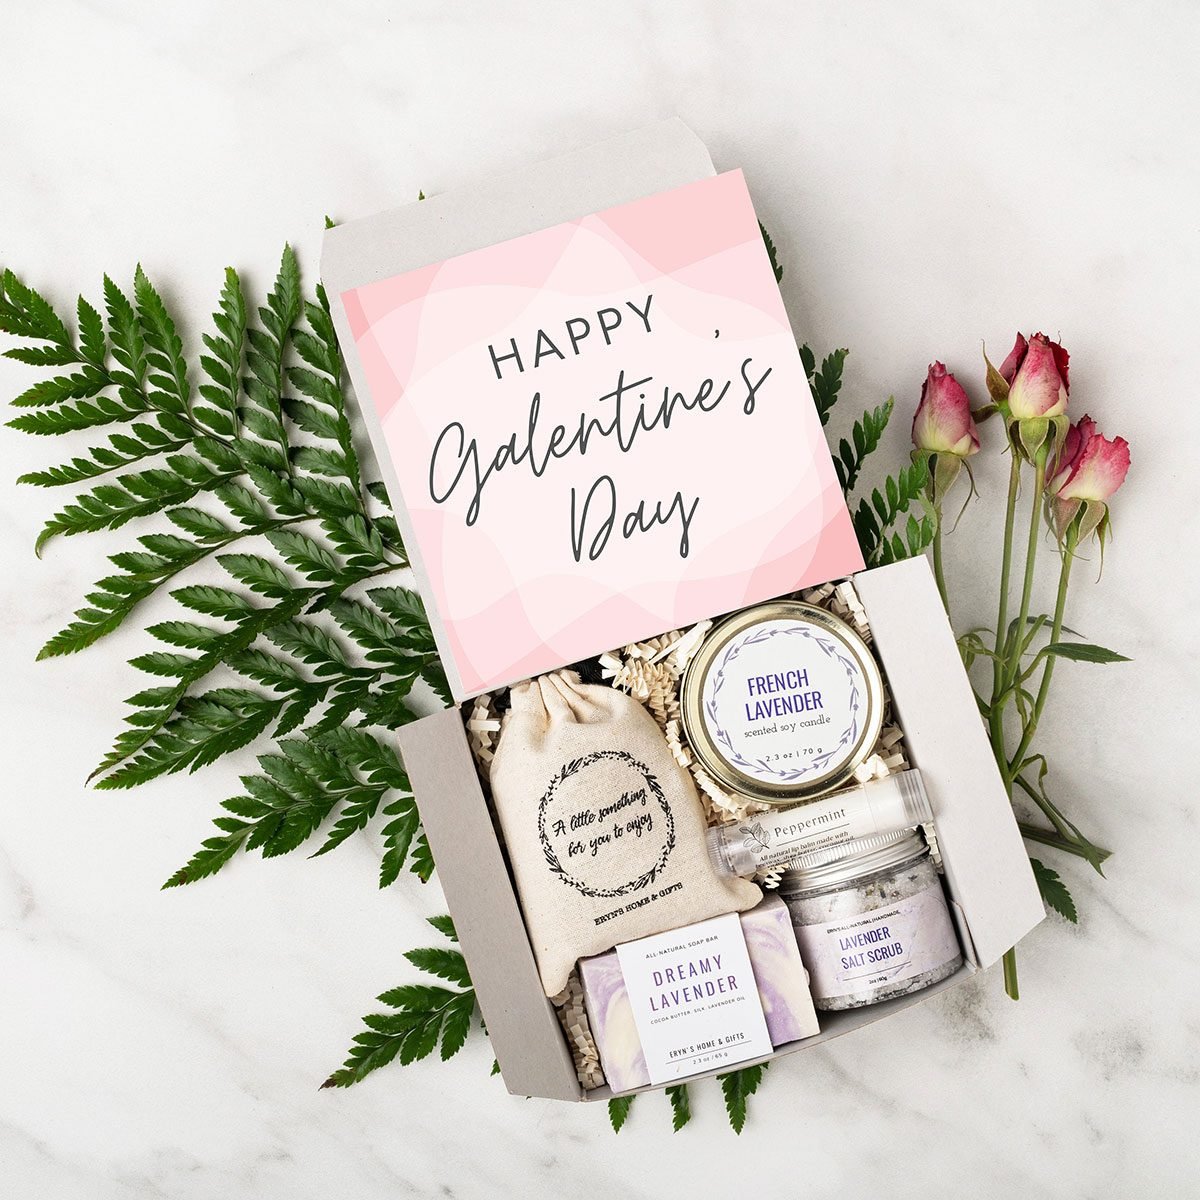 Easy Galentine's Day Gift Idea - Savvy Saving Couple